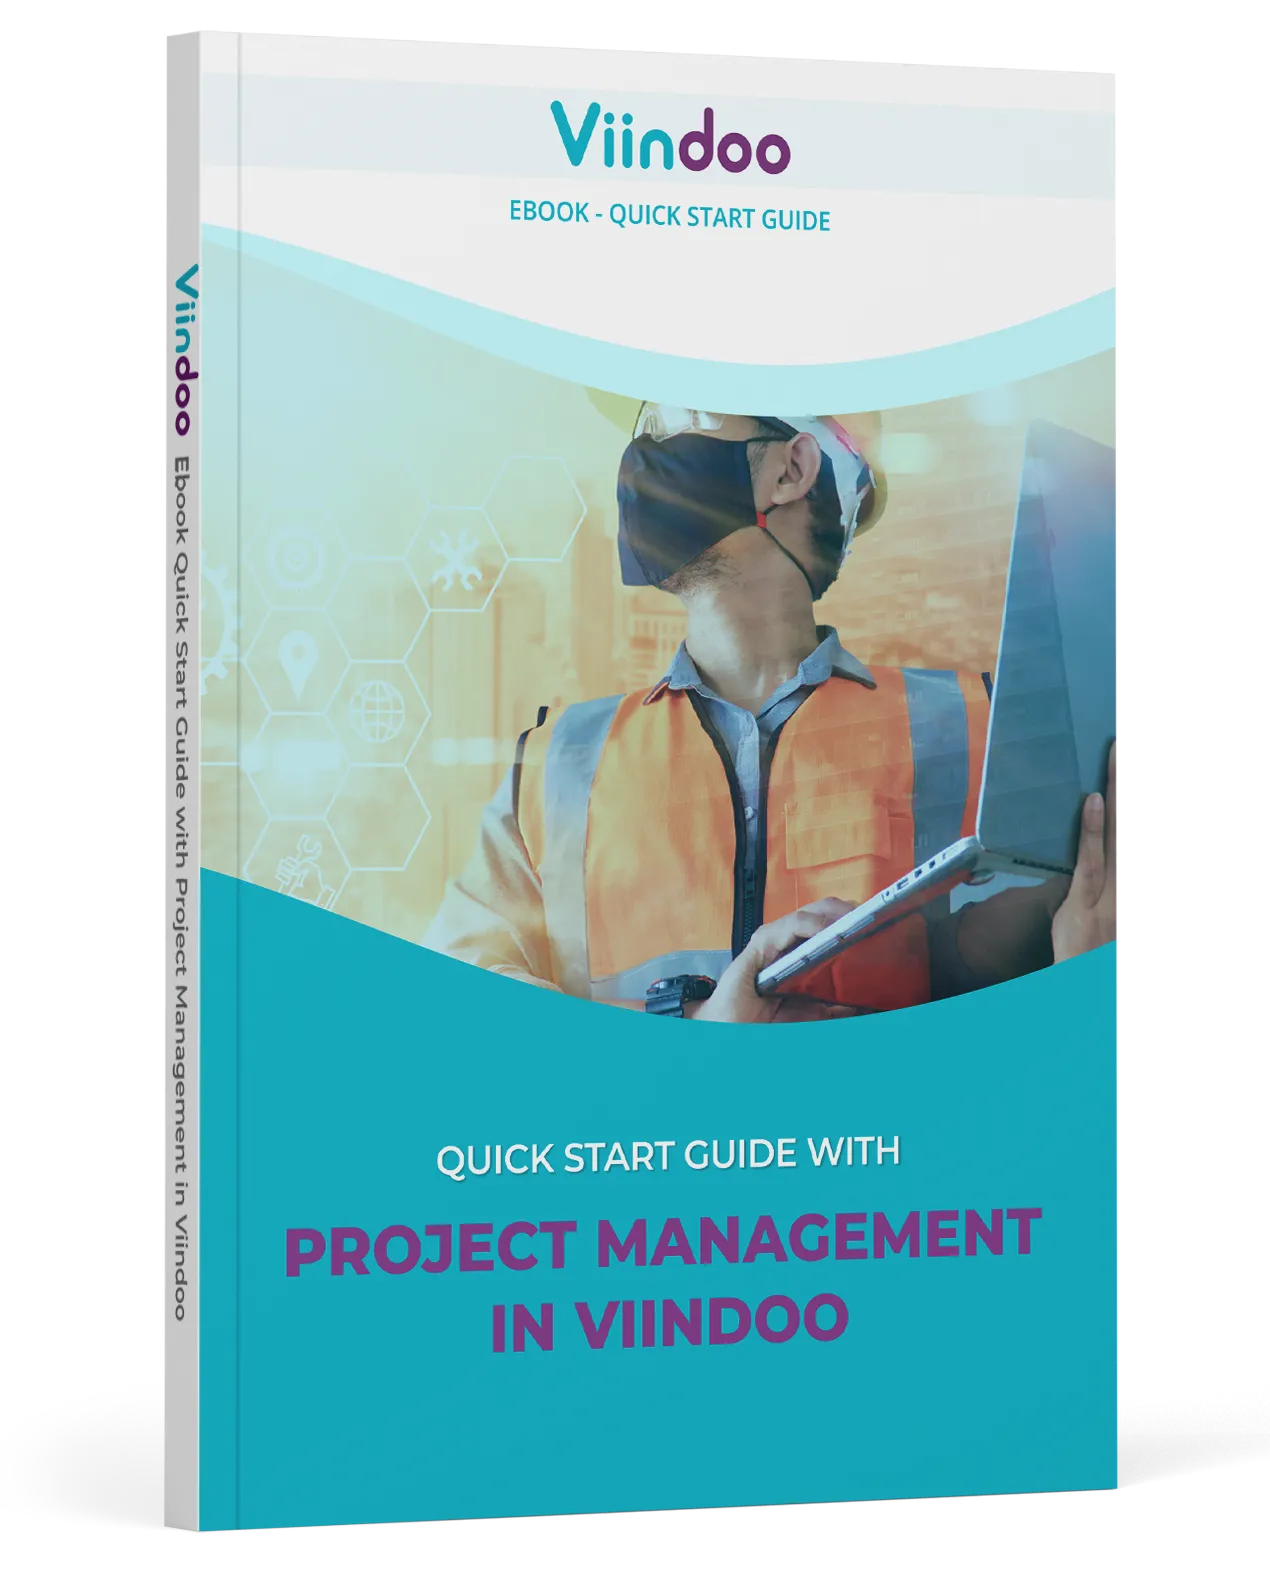 Quick Start Guide with Project Management in Viindoo